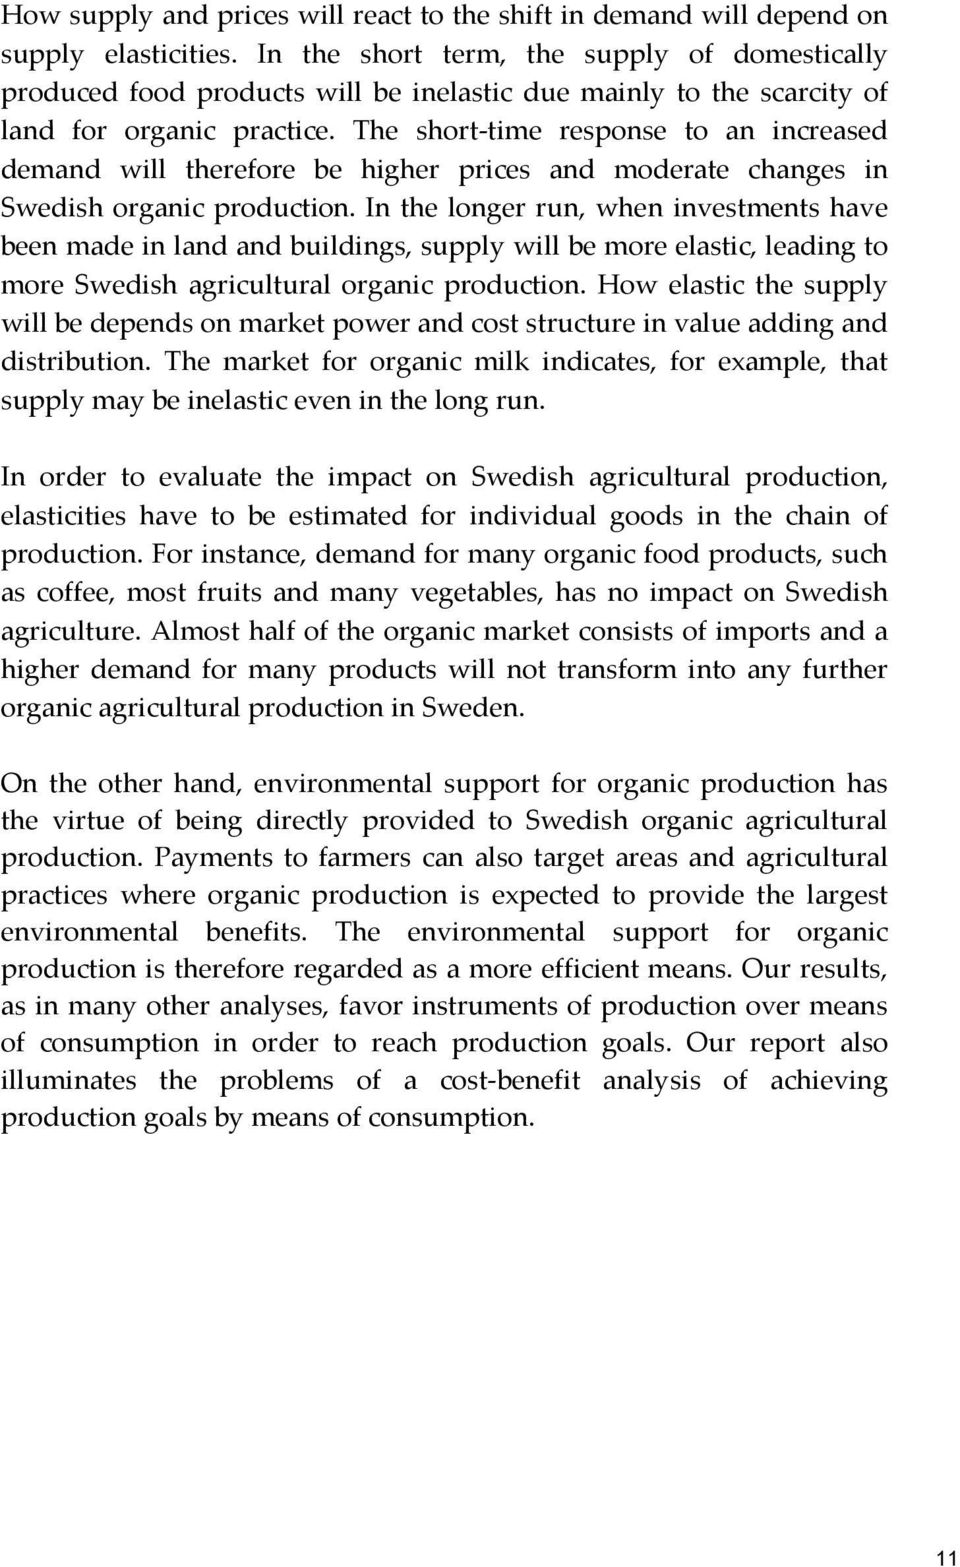 The short-time response to an increased demand will therefore be higher prices and moderate changes in Swedish organic production.